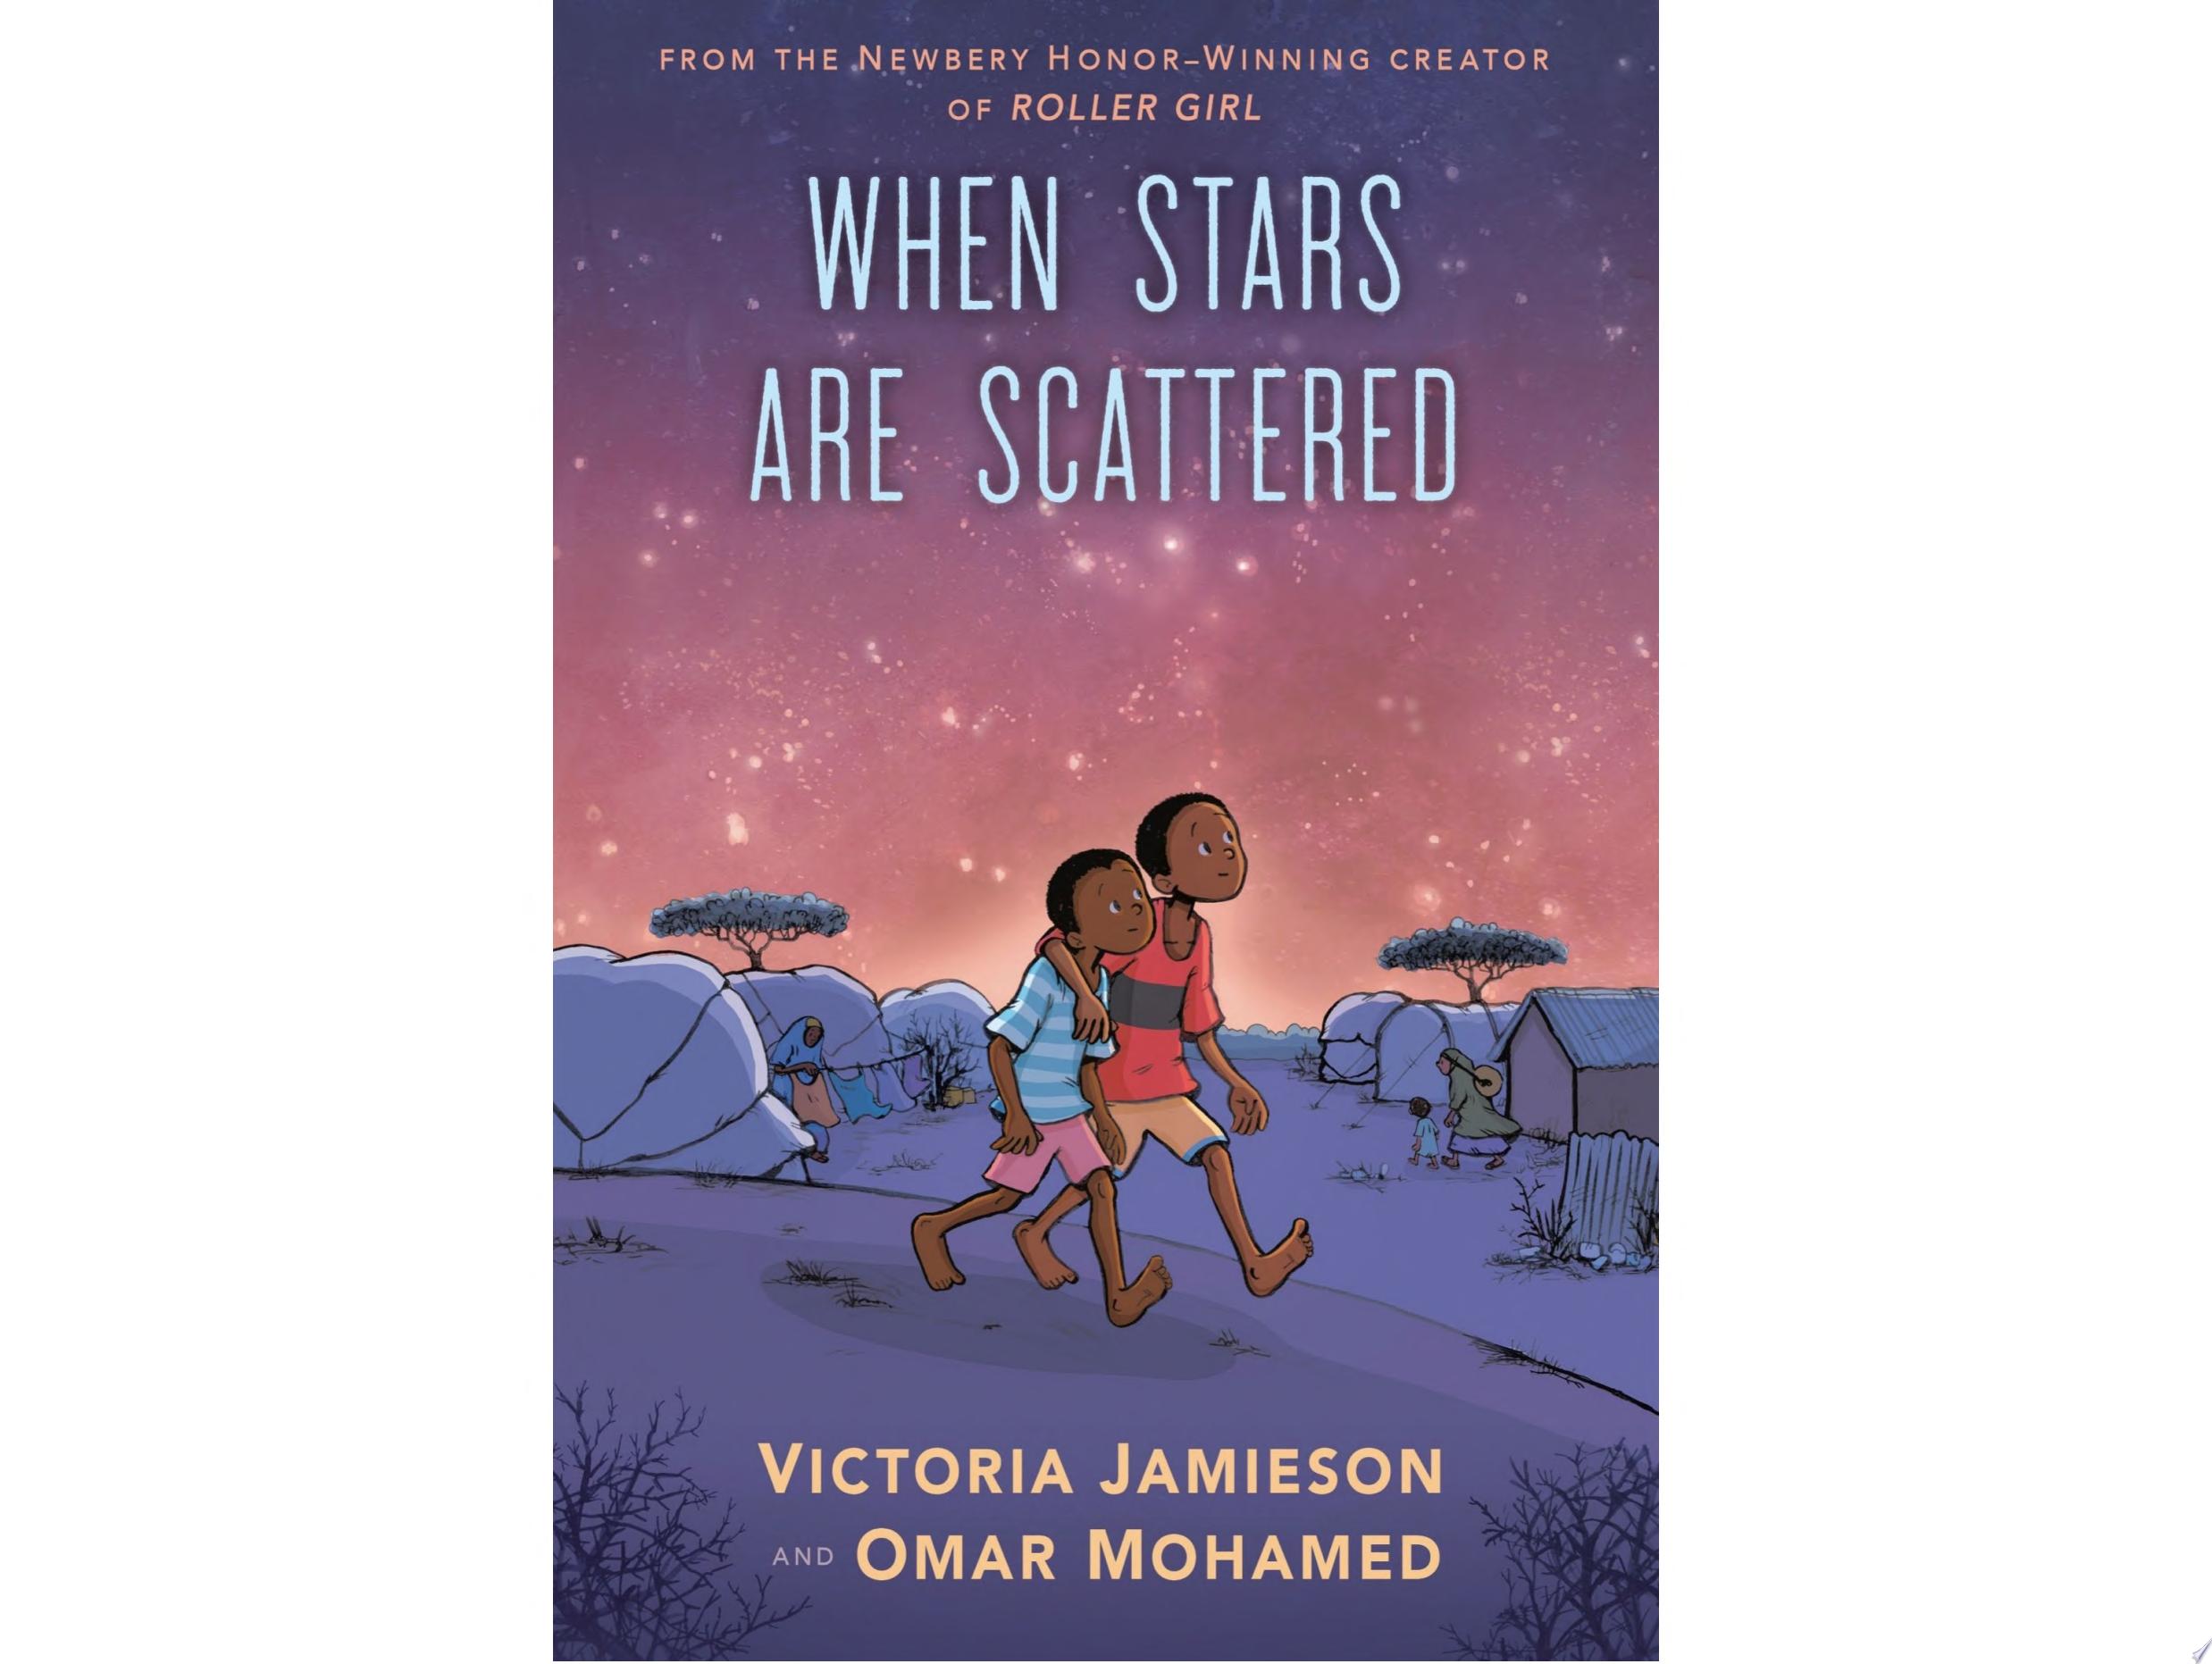 Image for "When Stars Are Scattered"